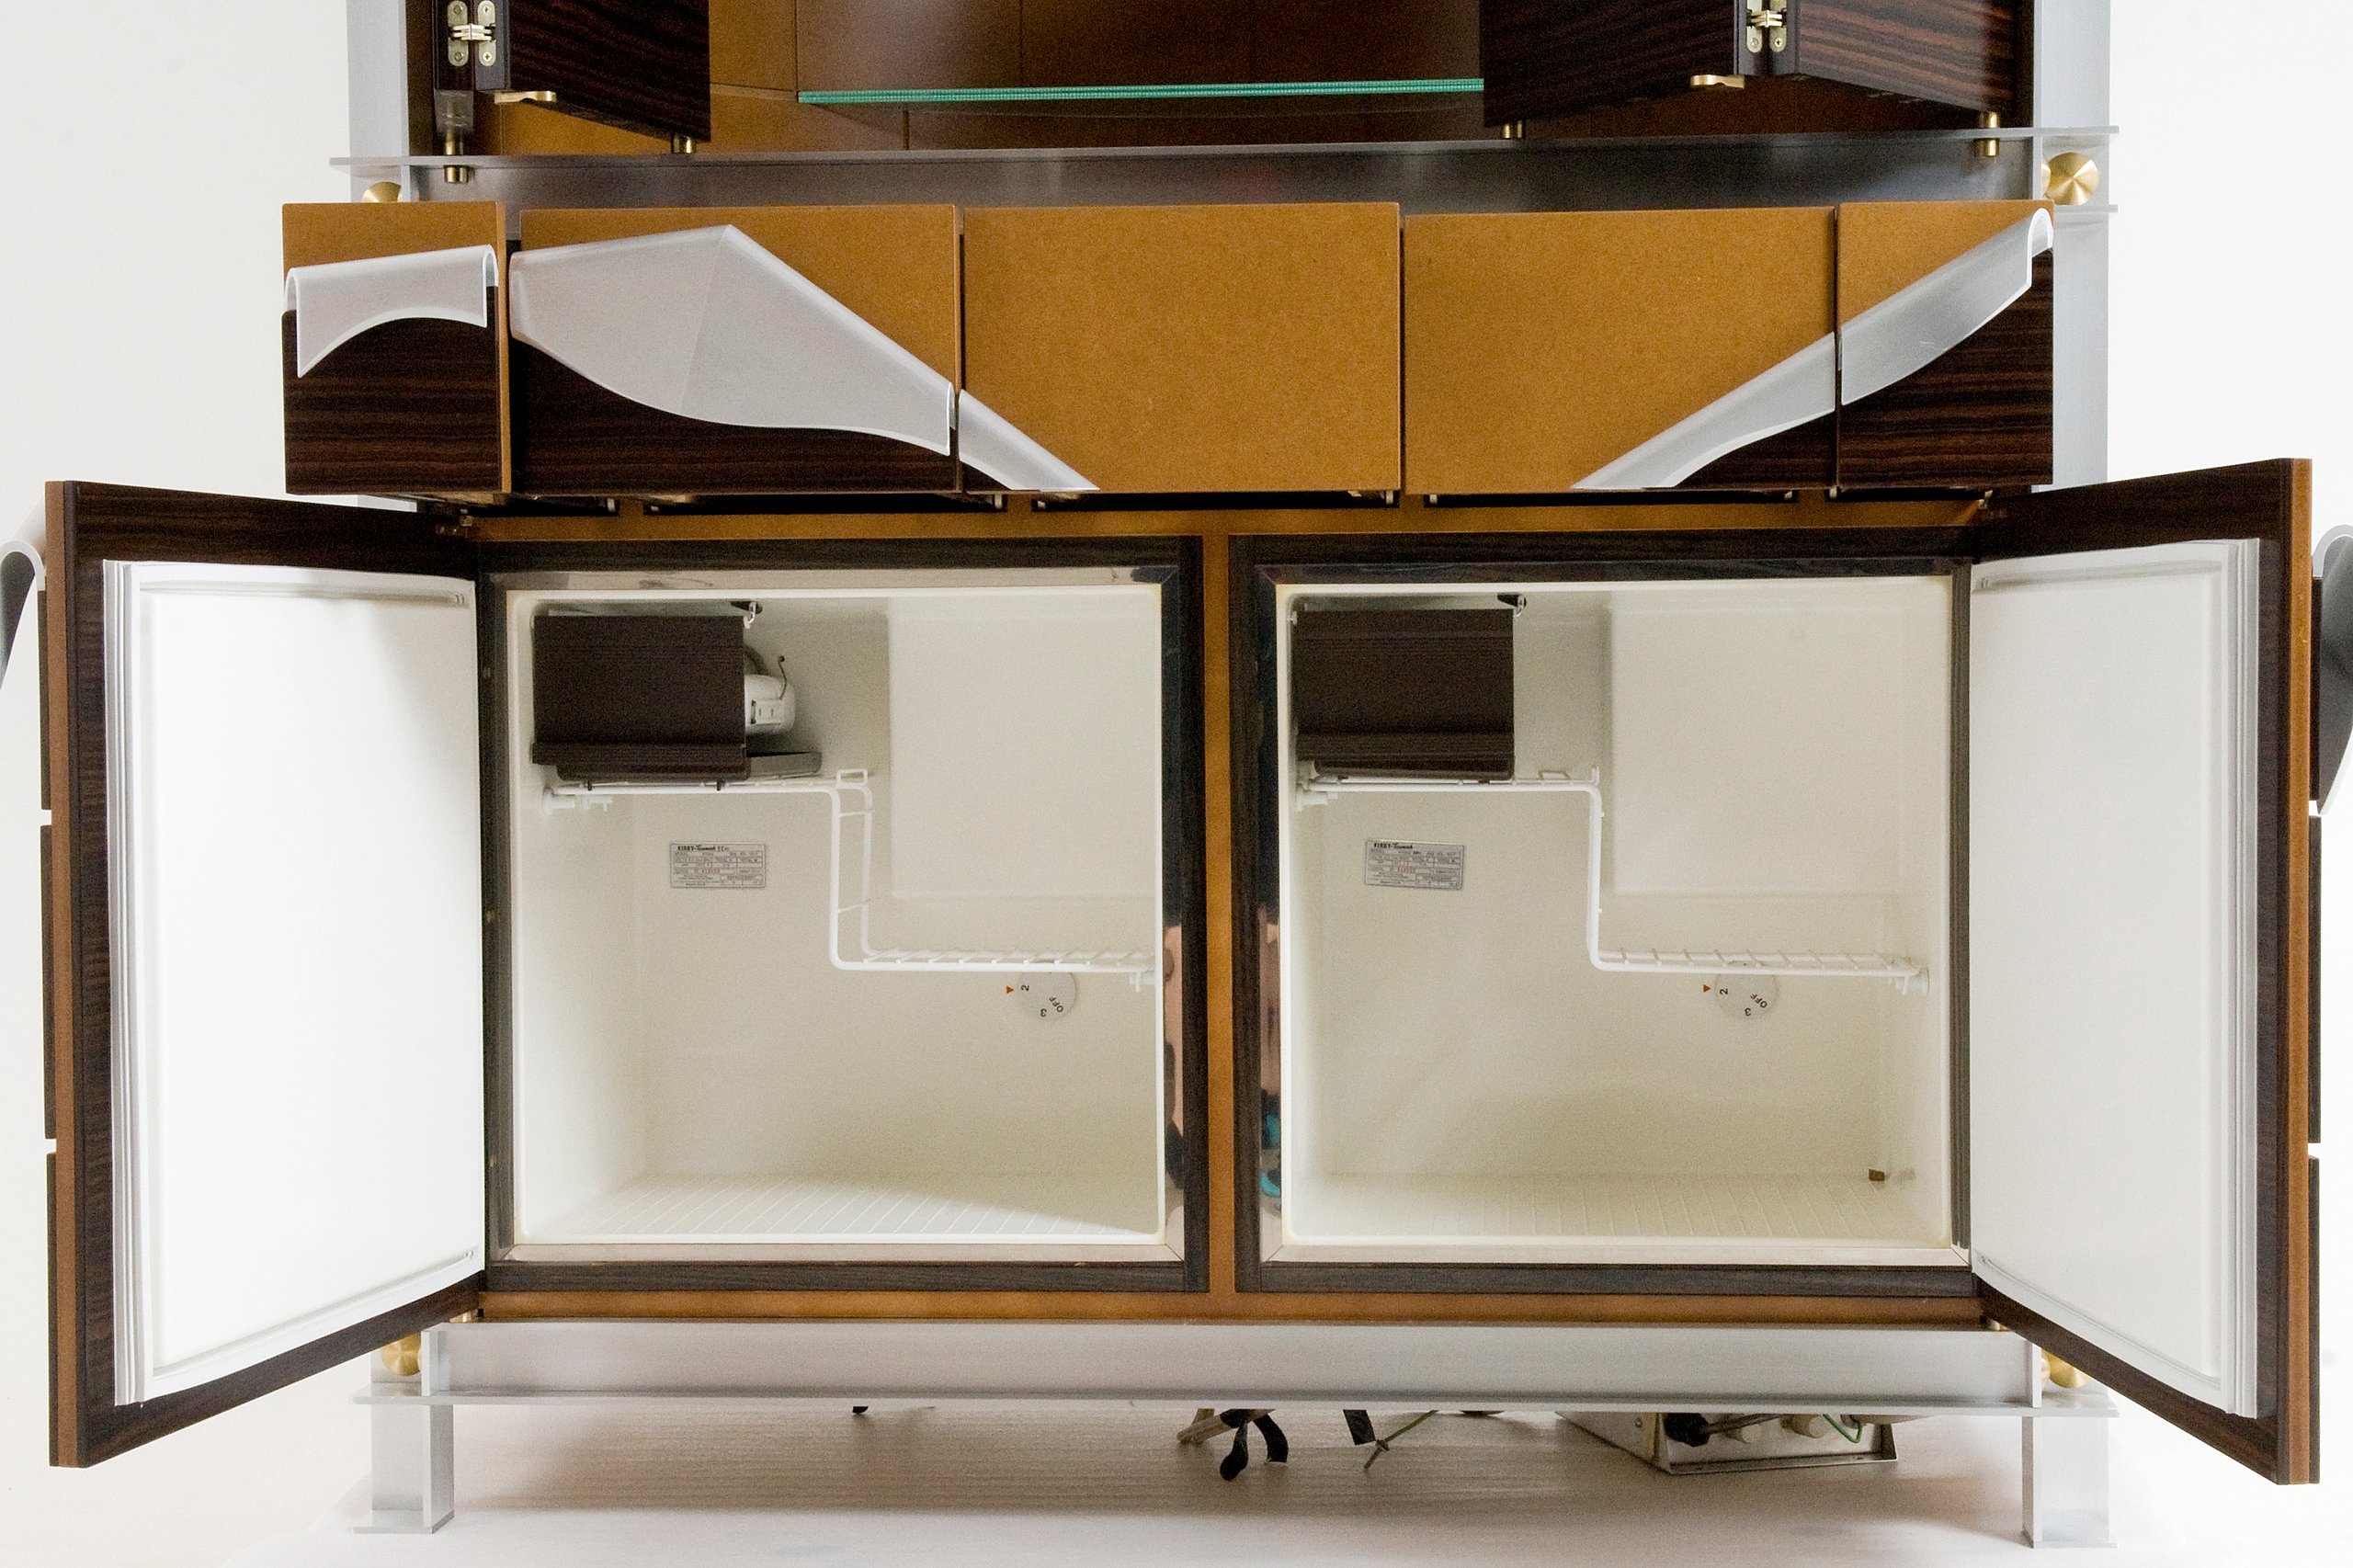 Credenze or sideboard designed by Iain Halliday for the Powerhouse Museum boardroom